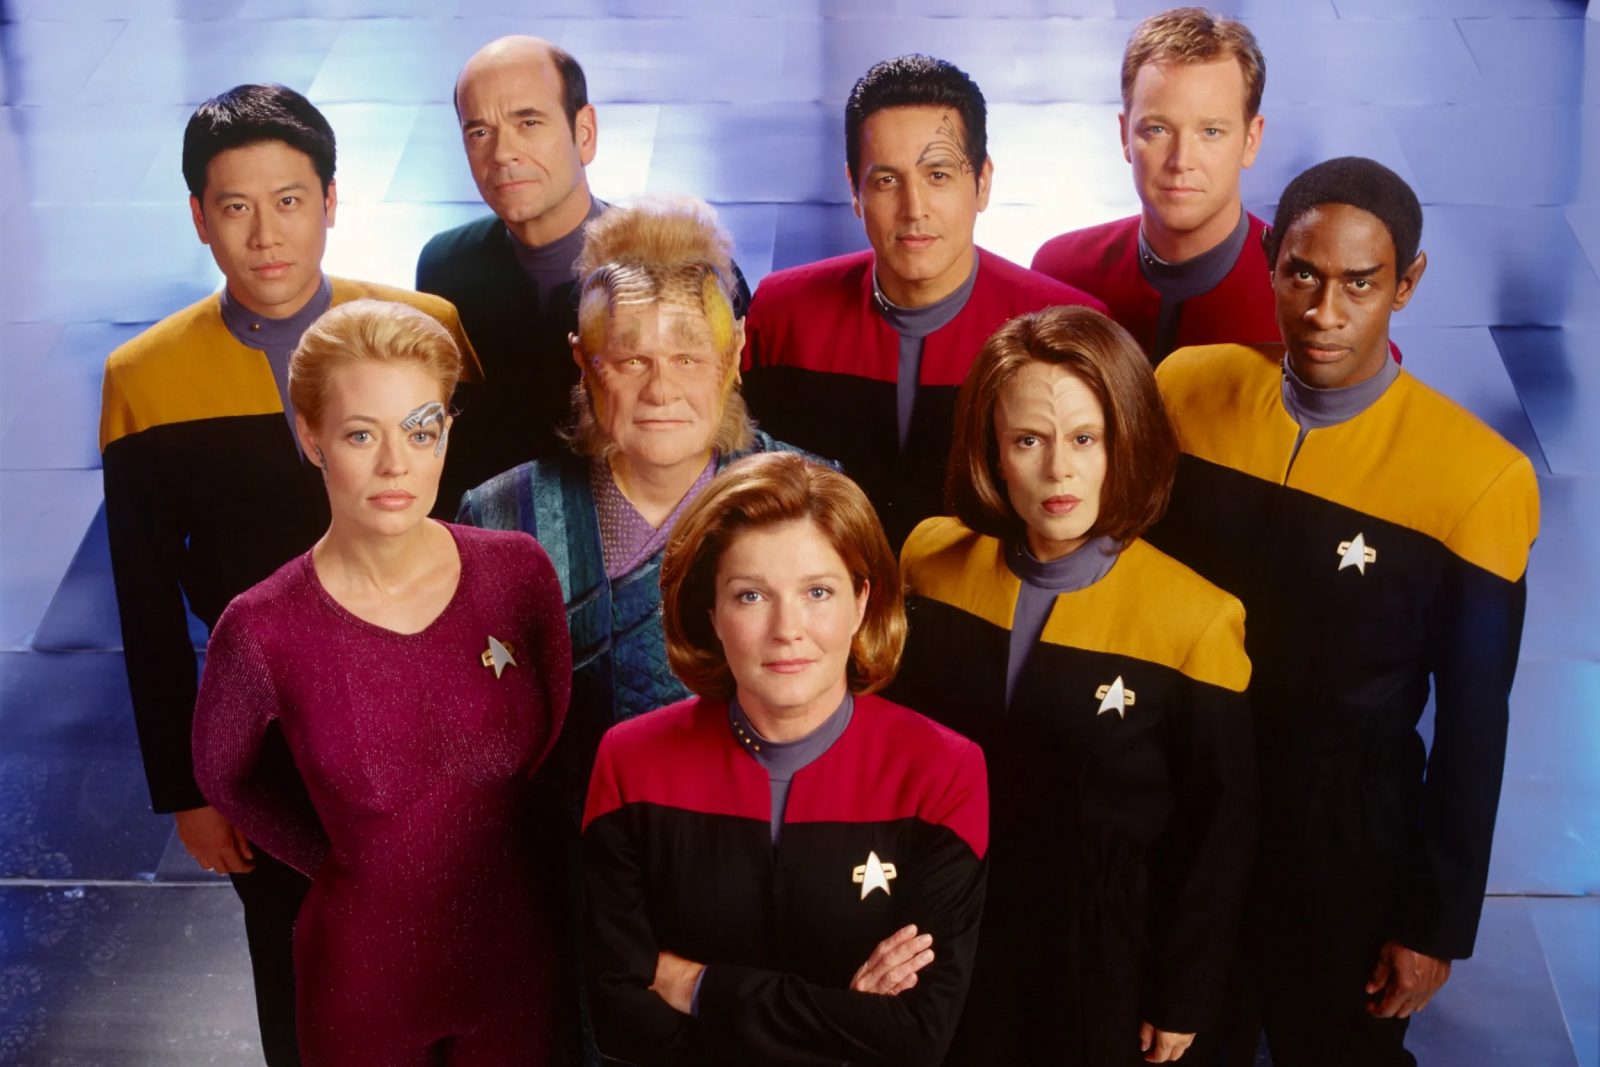 Do You Remember These TV Shows That Aired in the ’90s? Star Trek: Voyager